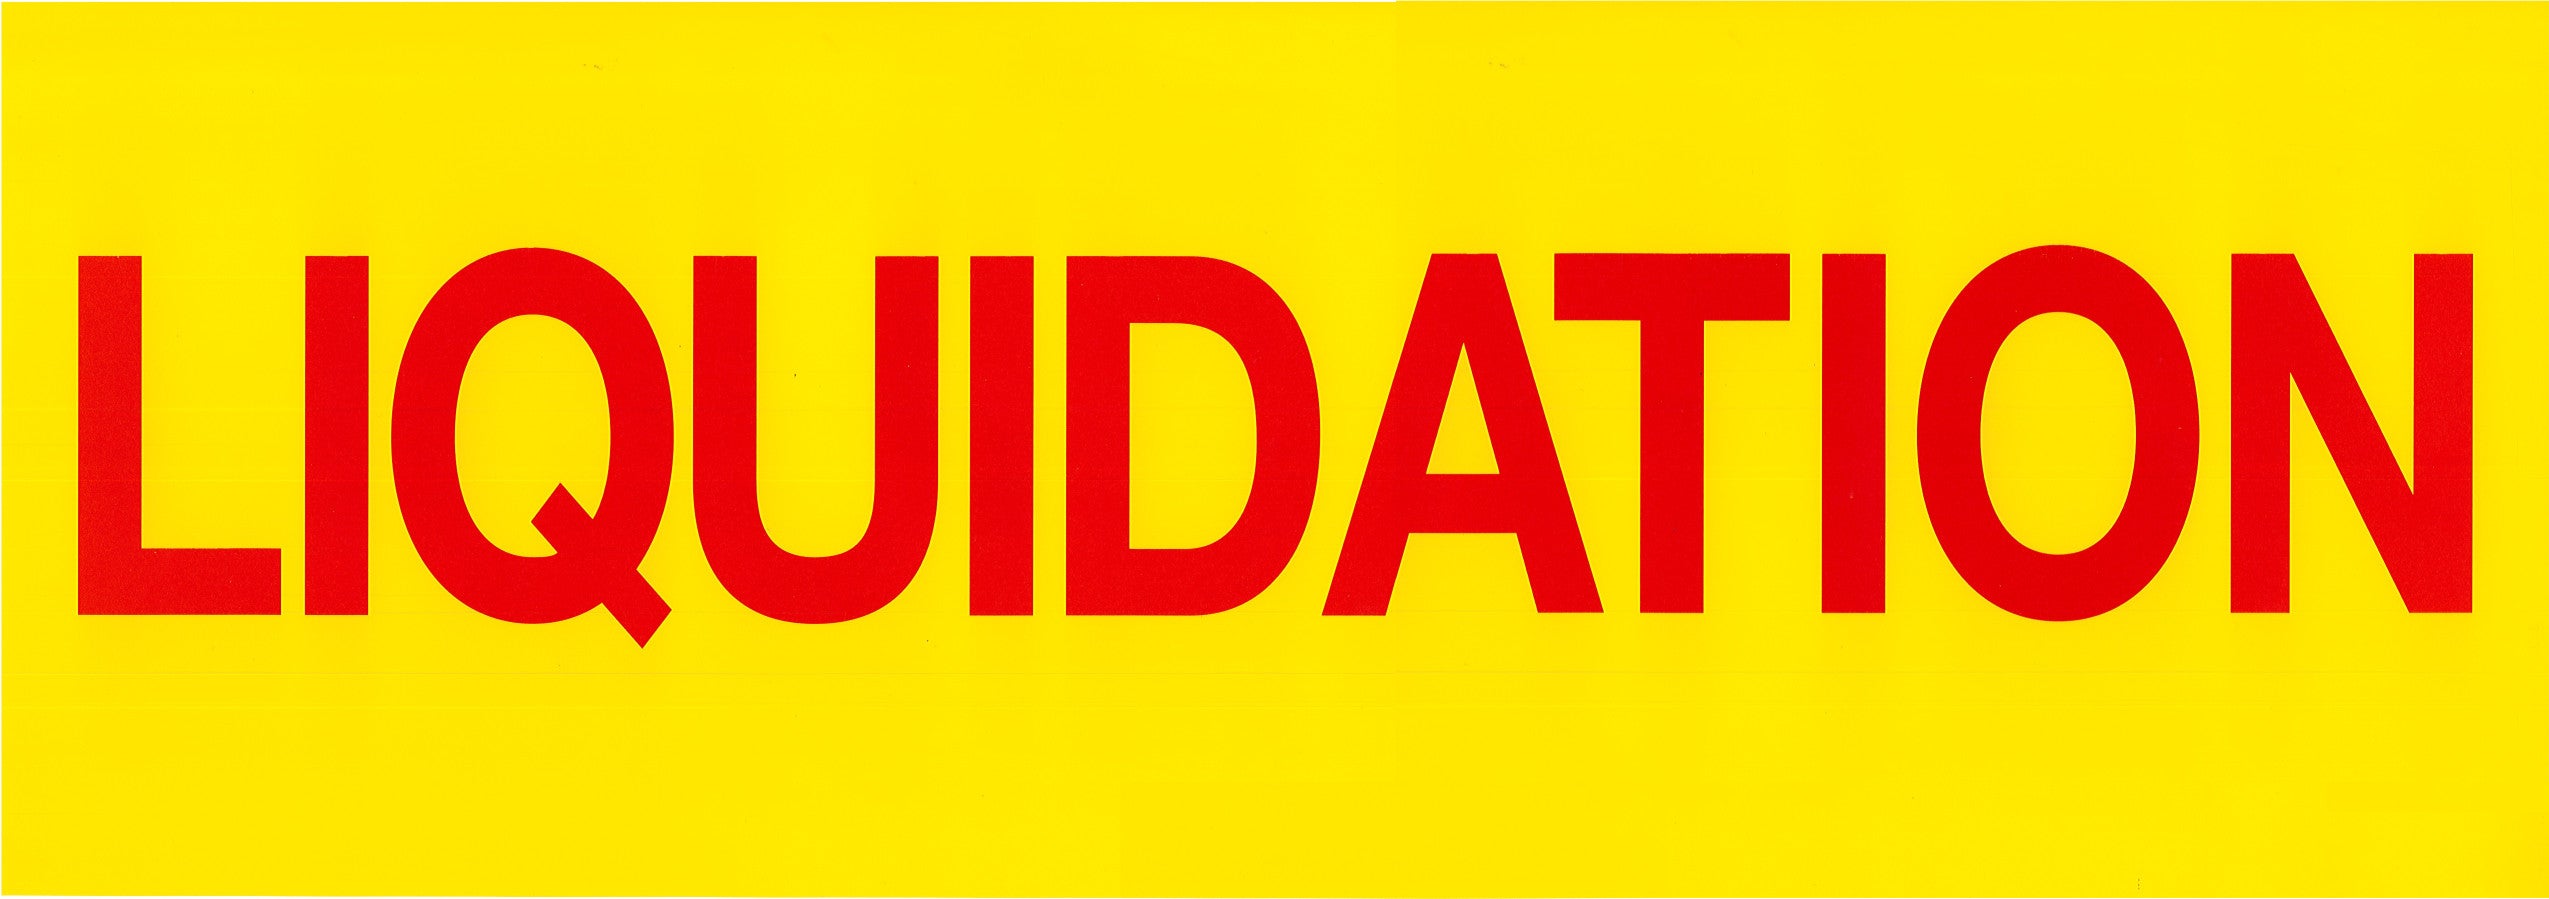 DittaDisplay Retails Solutions Affiches combinée 23x65cm liquidation rouge jaune Kombinierte Liquidation rot gelb Poster Combined posters Liquidation red yellow